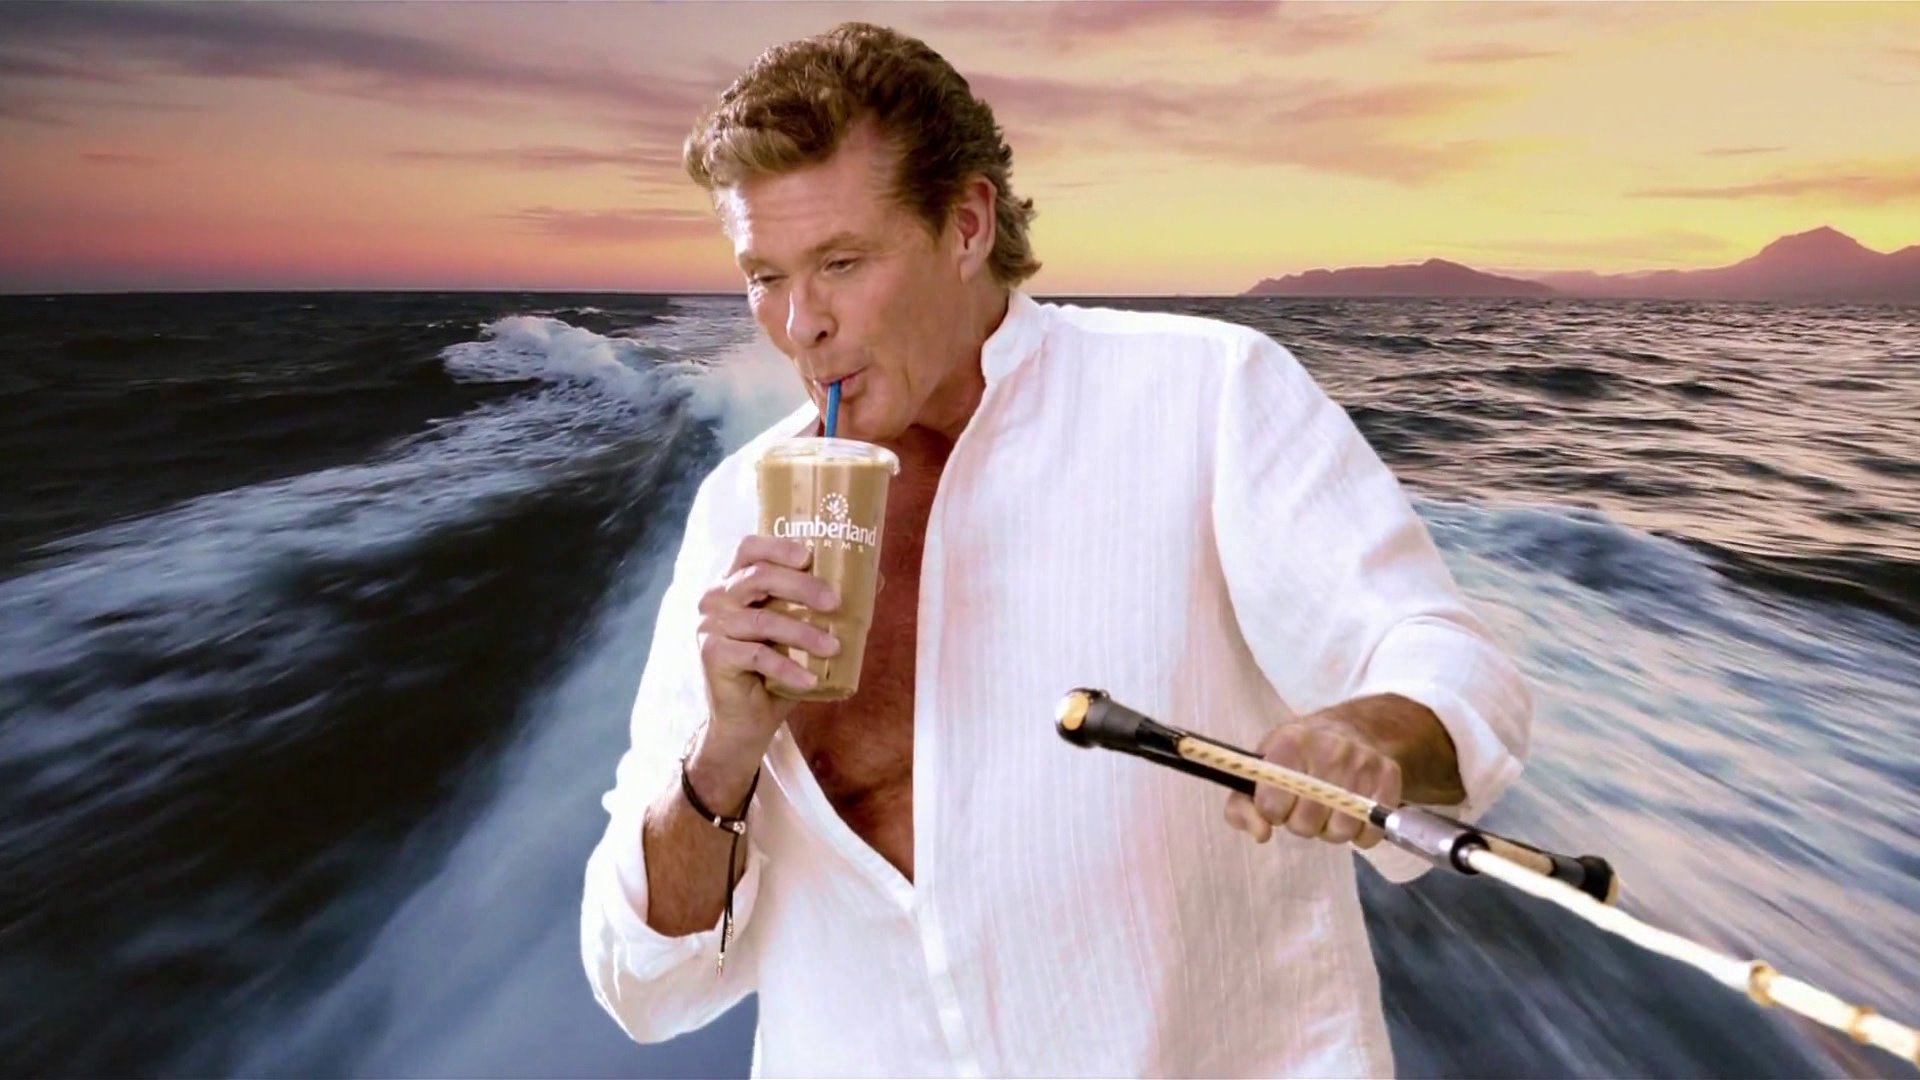 Can't beat the hoff